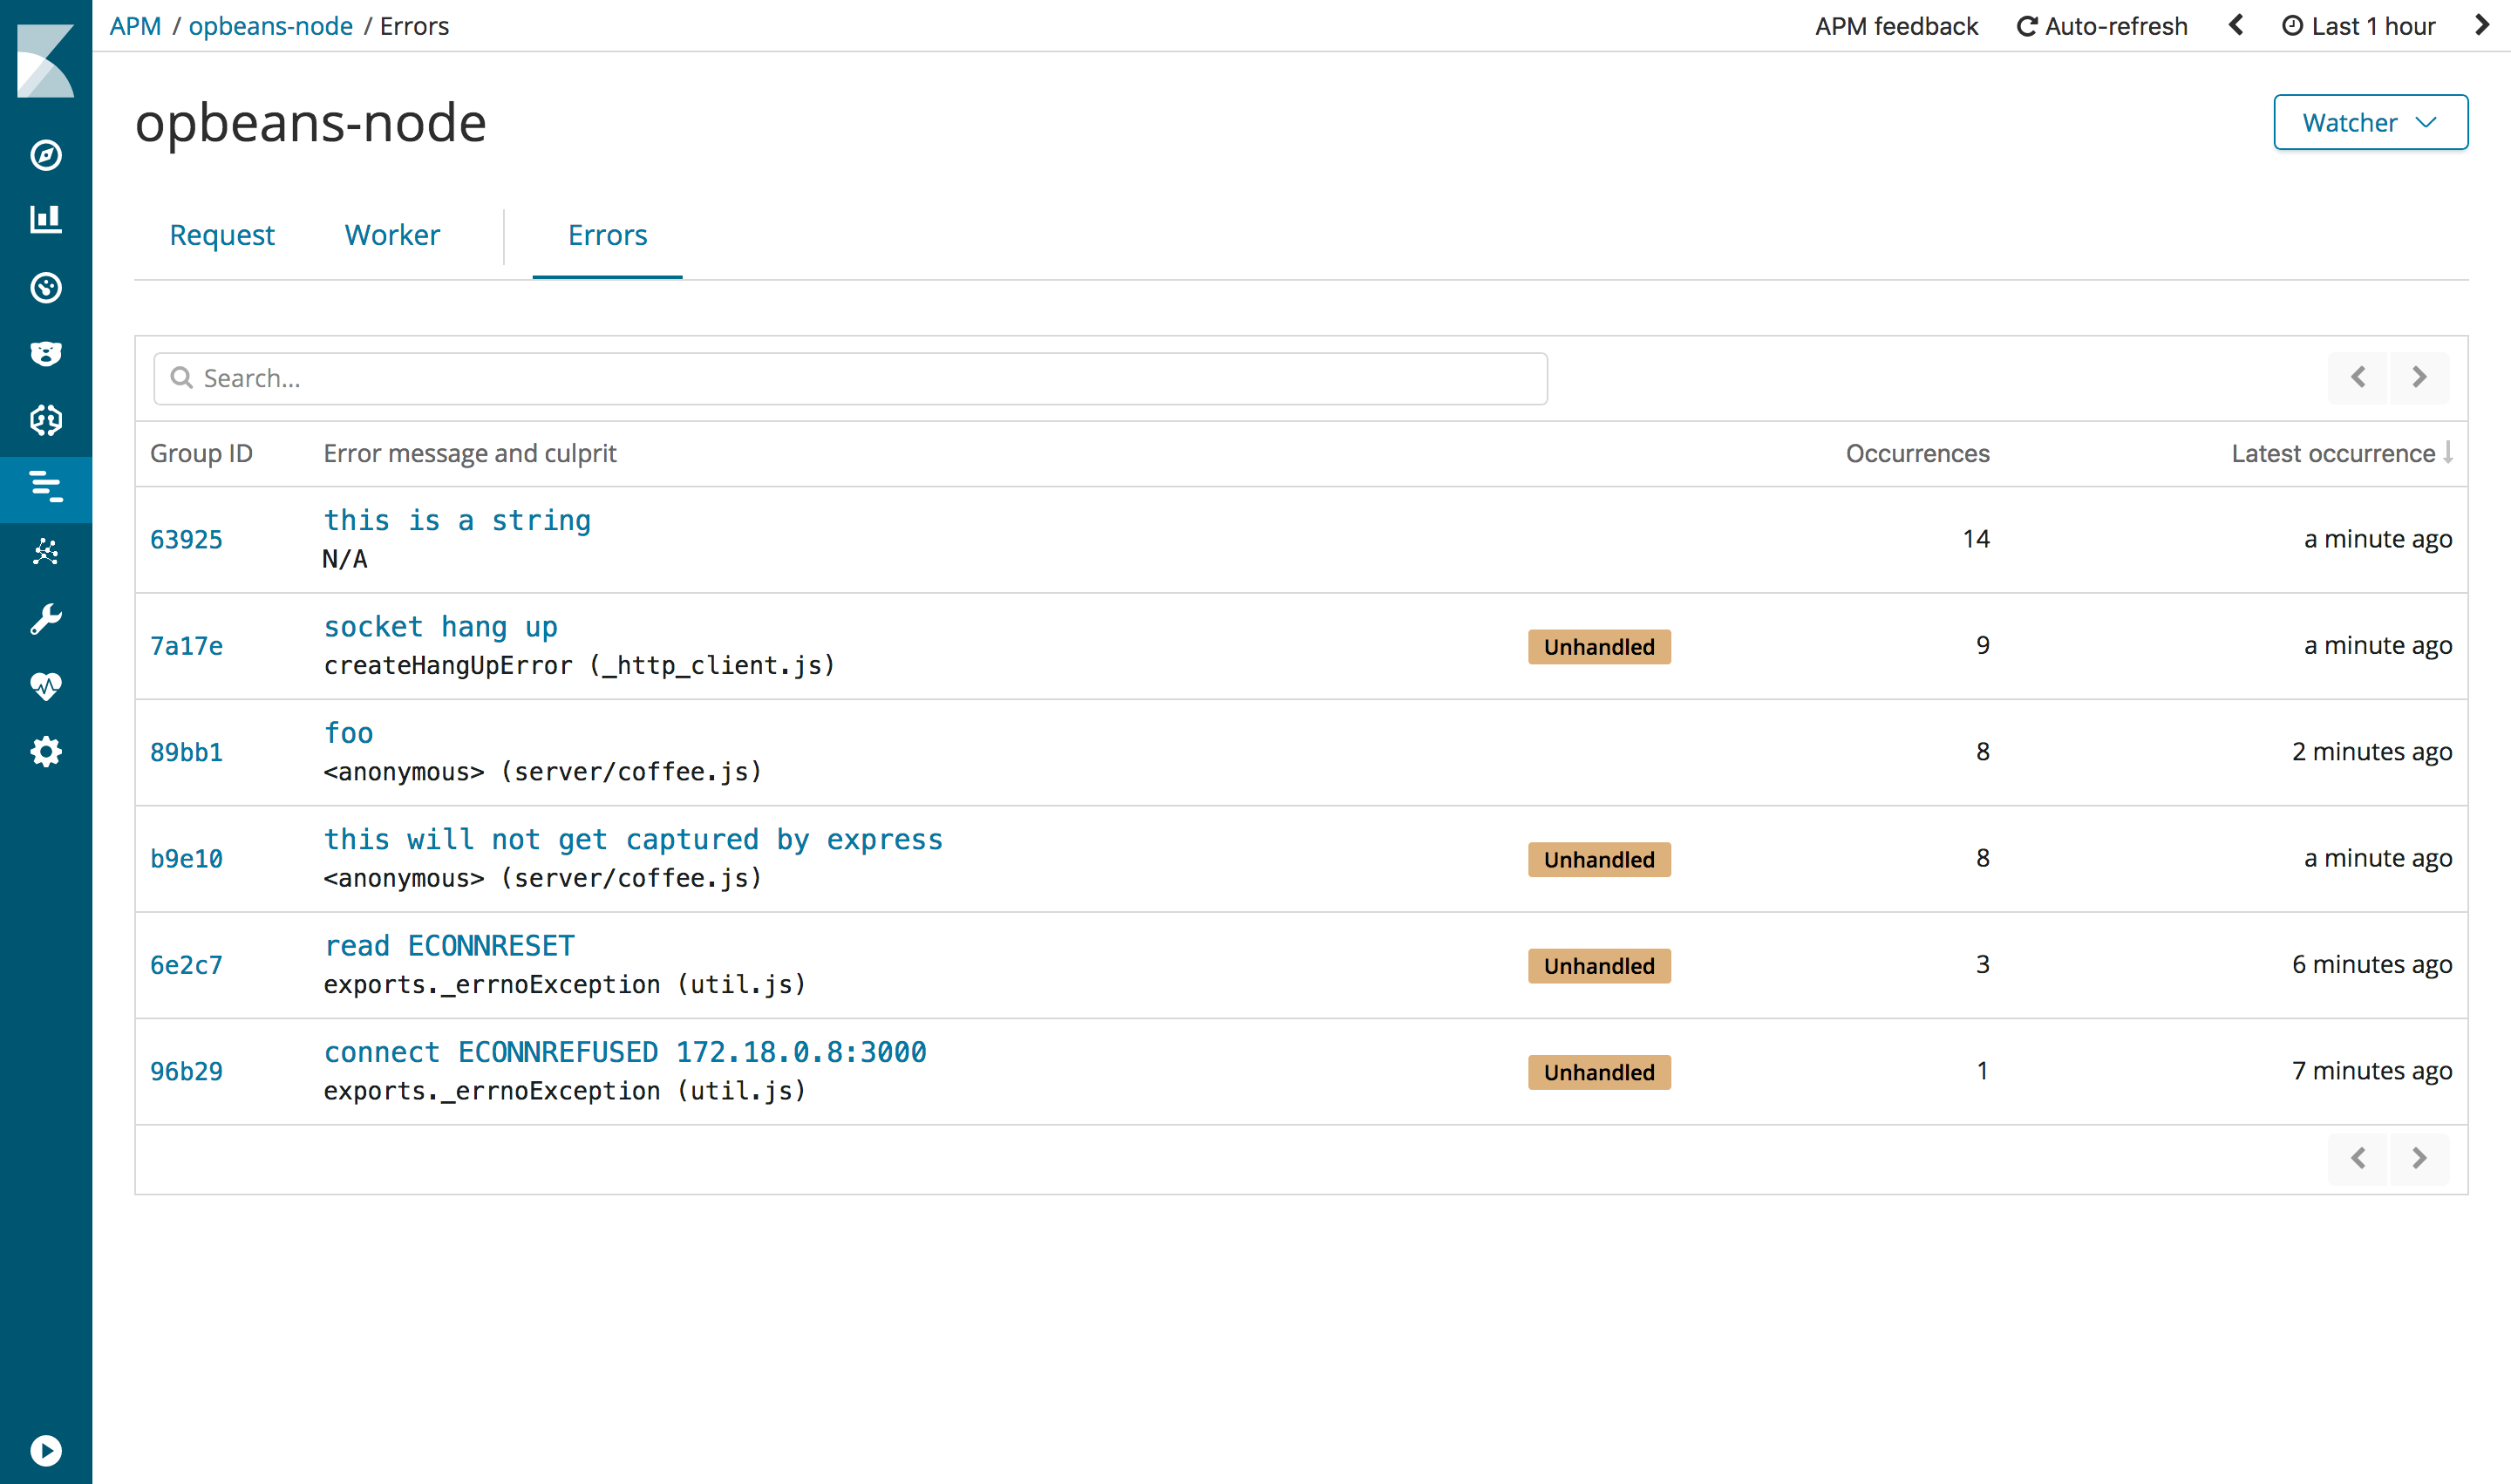 Example view of the errors overview in the APM UI in Kibana